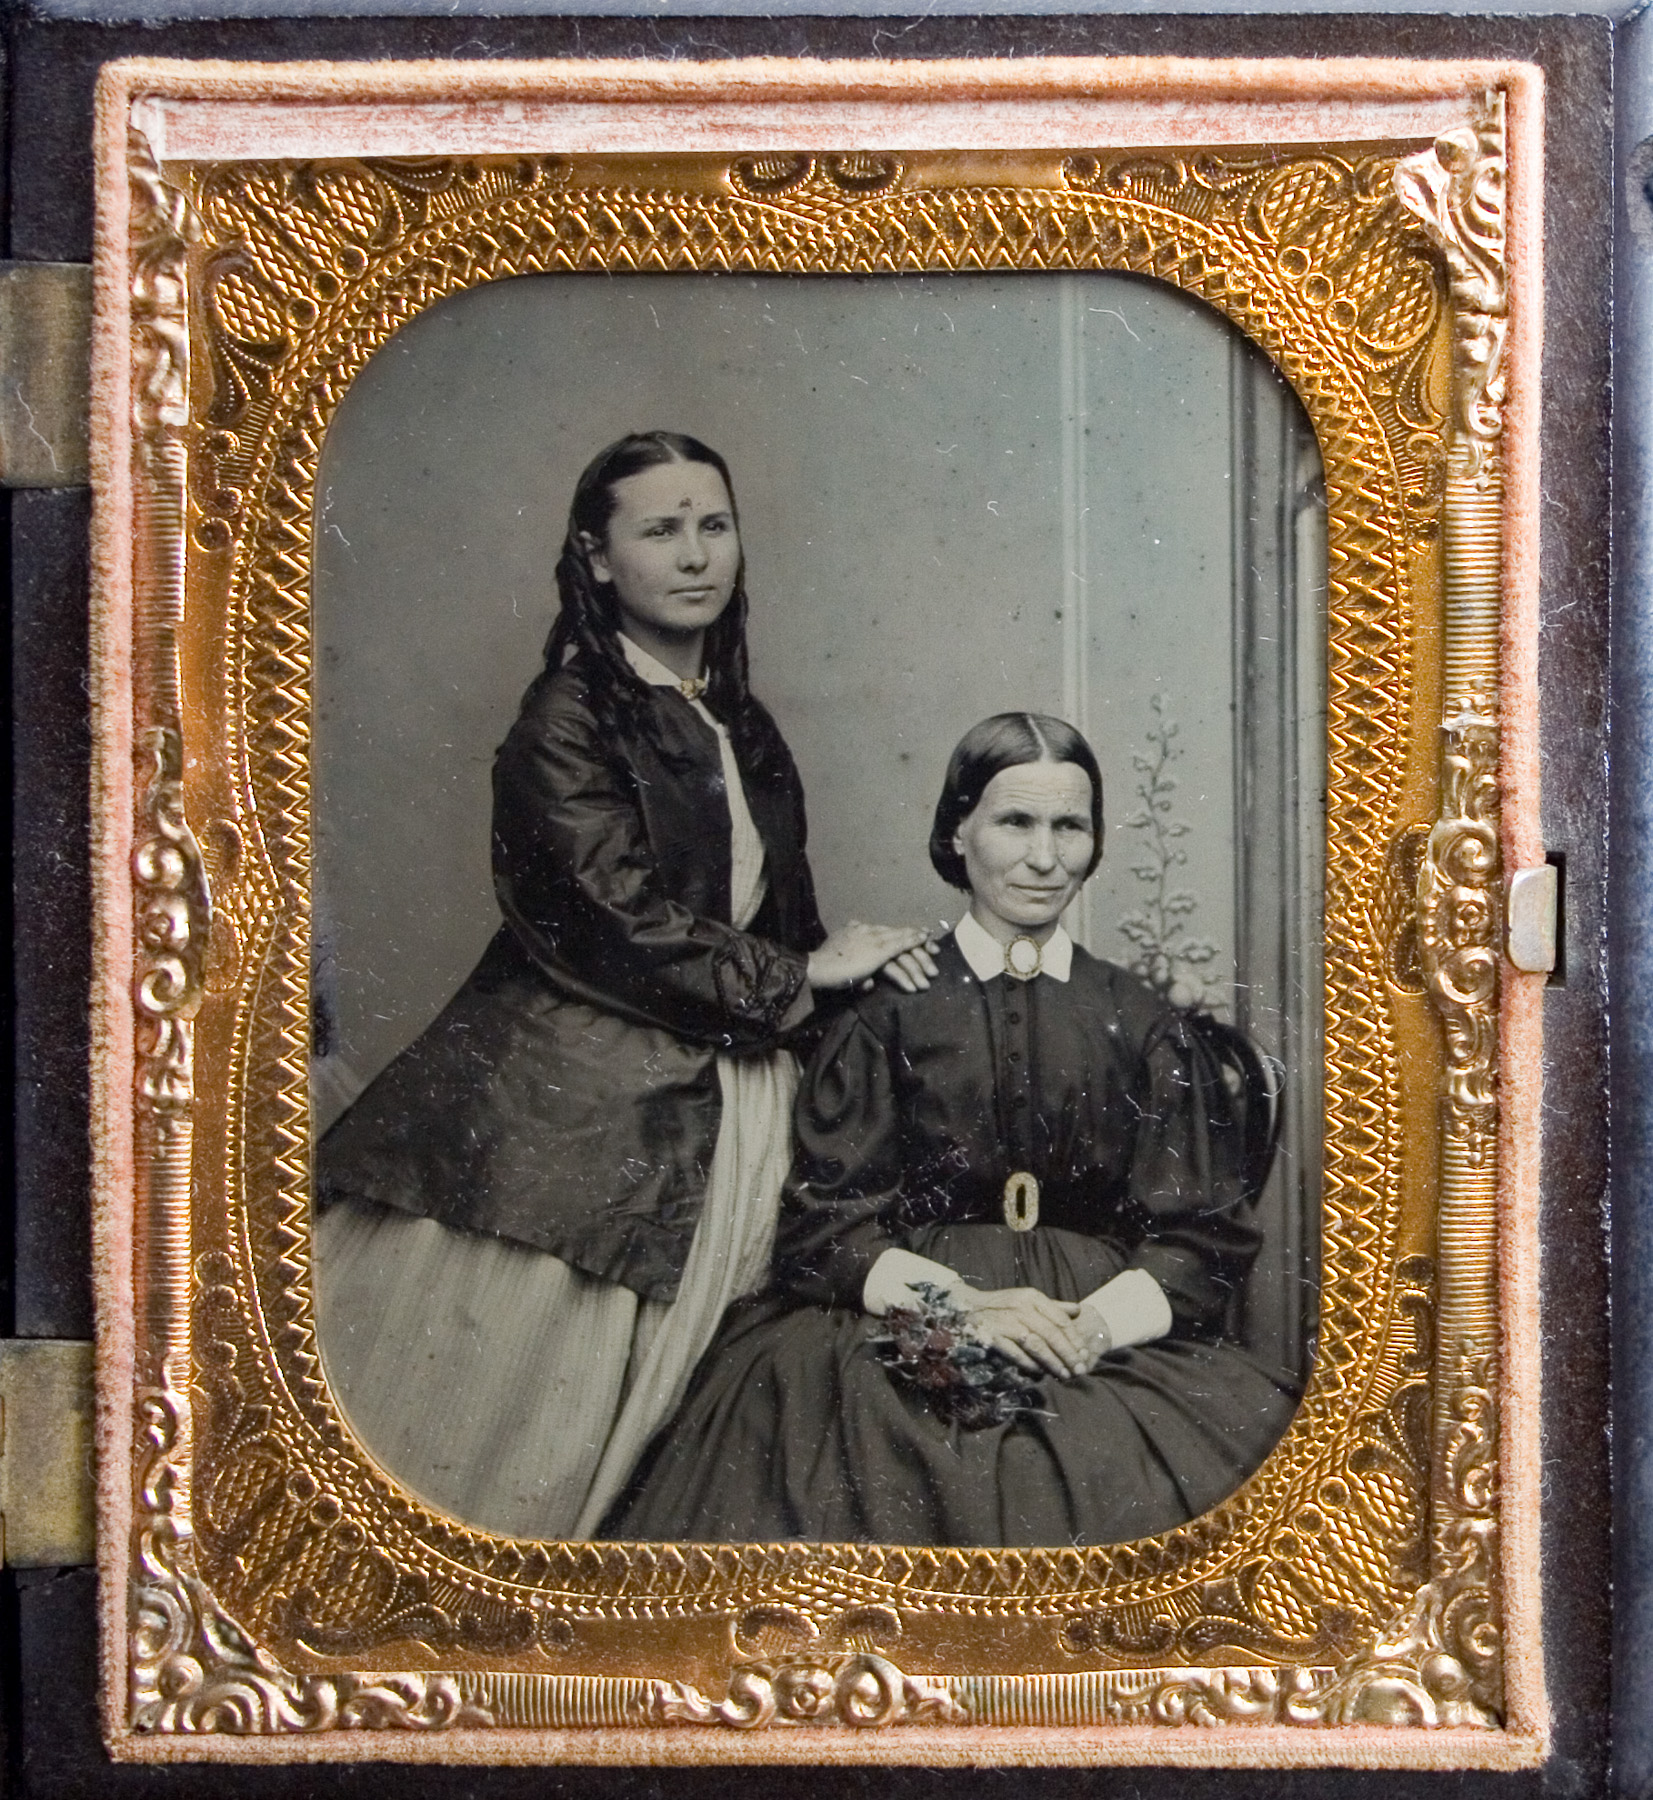 Mary Susan Thorburn (1850-1927) and her mother Jessie Catherine Thorburn (1824-1916), around 1867 / photographer unknown